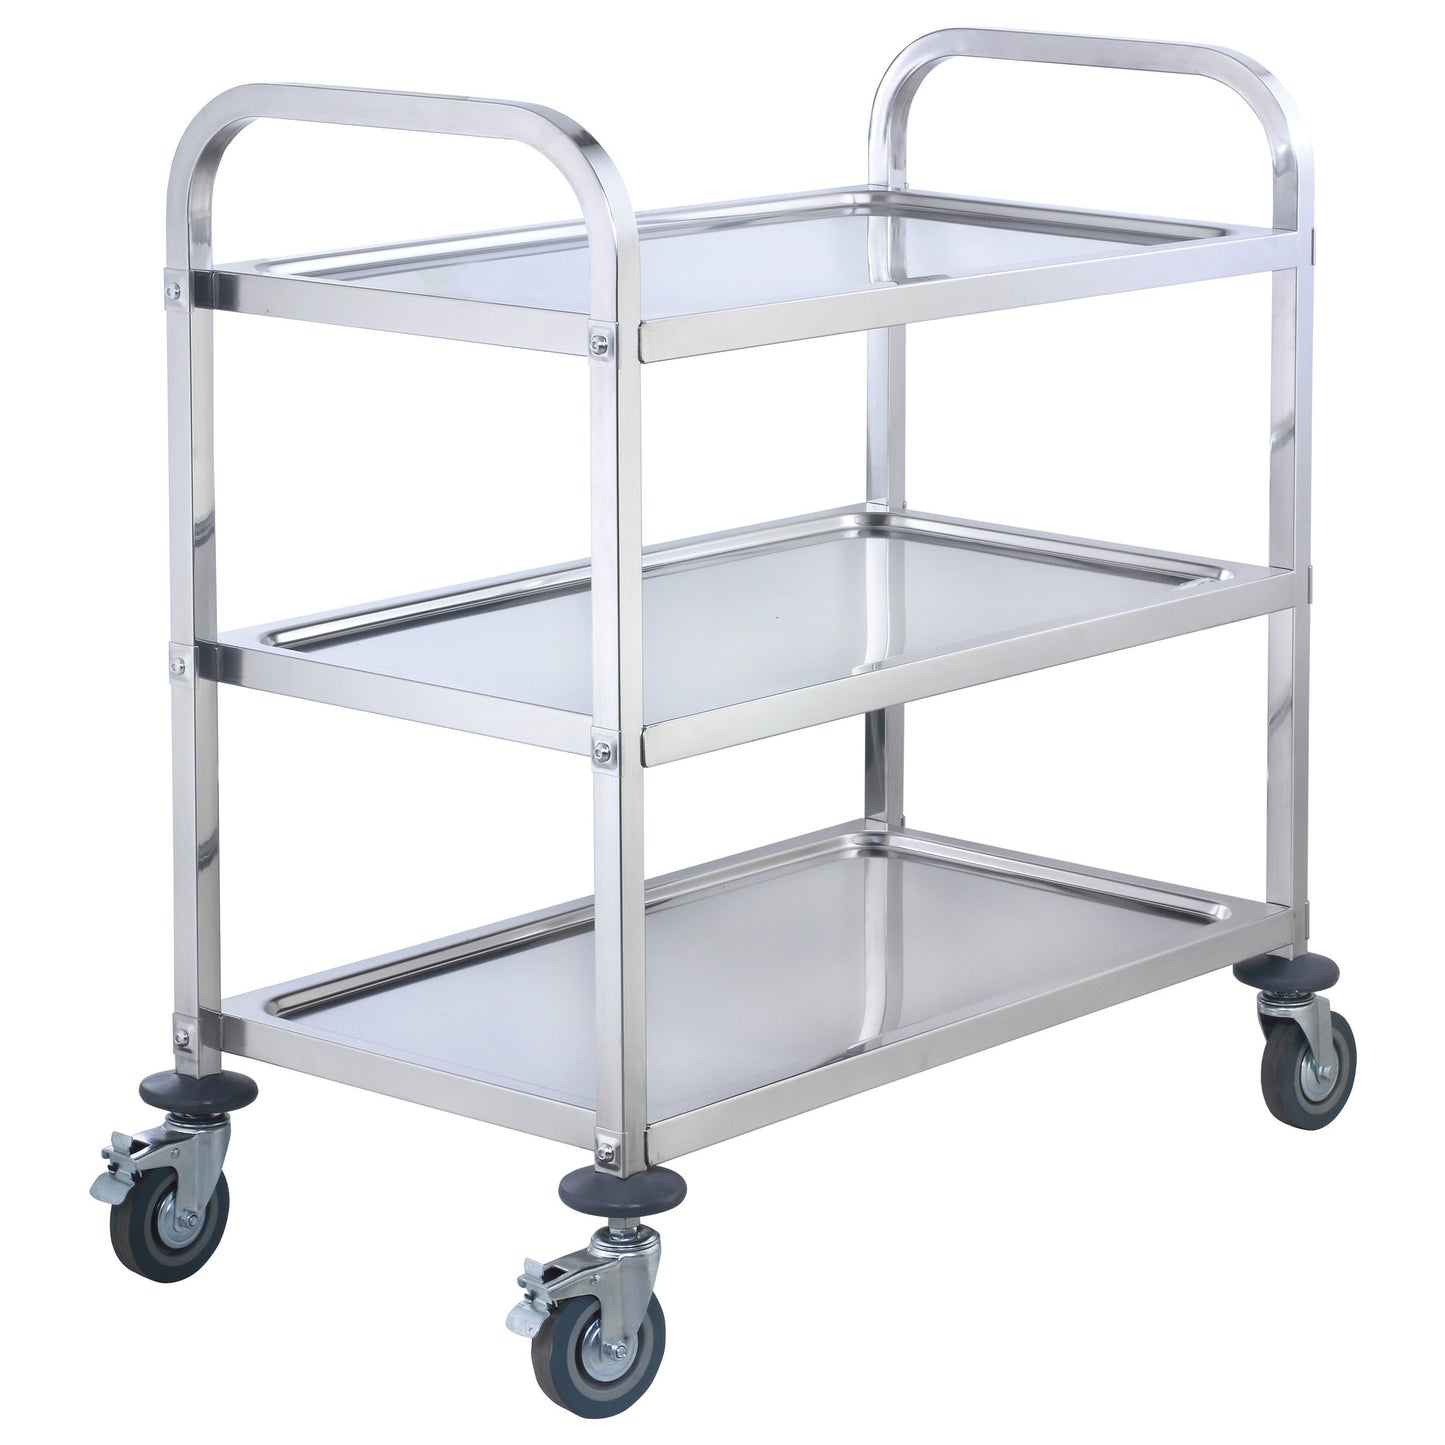 Stainless Steel Trolley, 3 Tiers - 30" x 16" x 33"